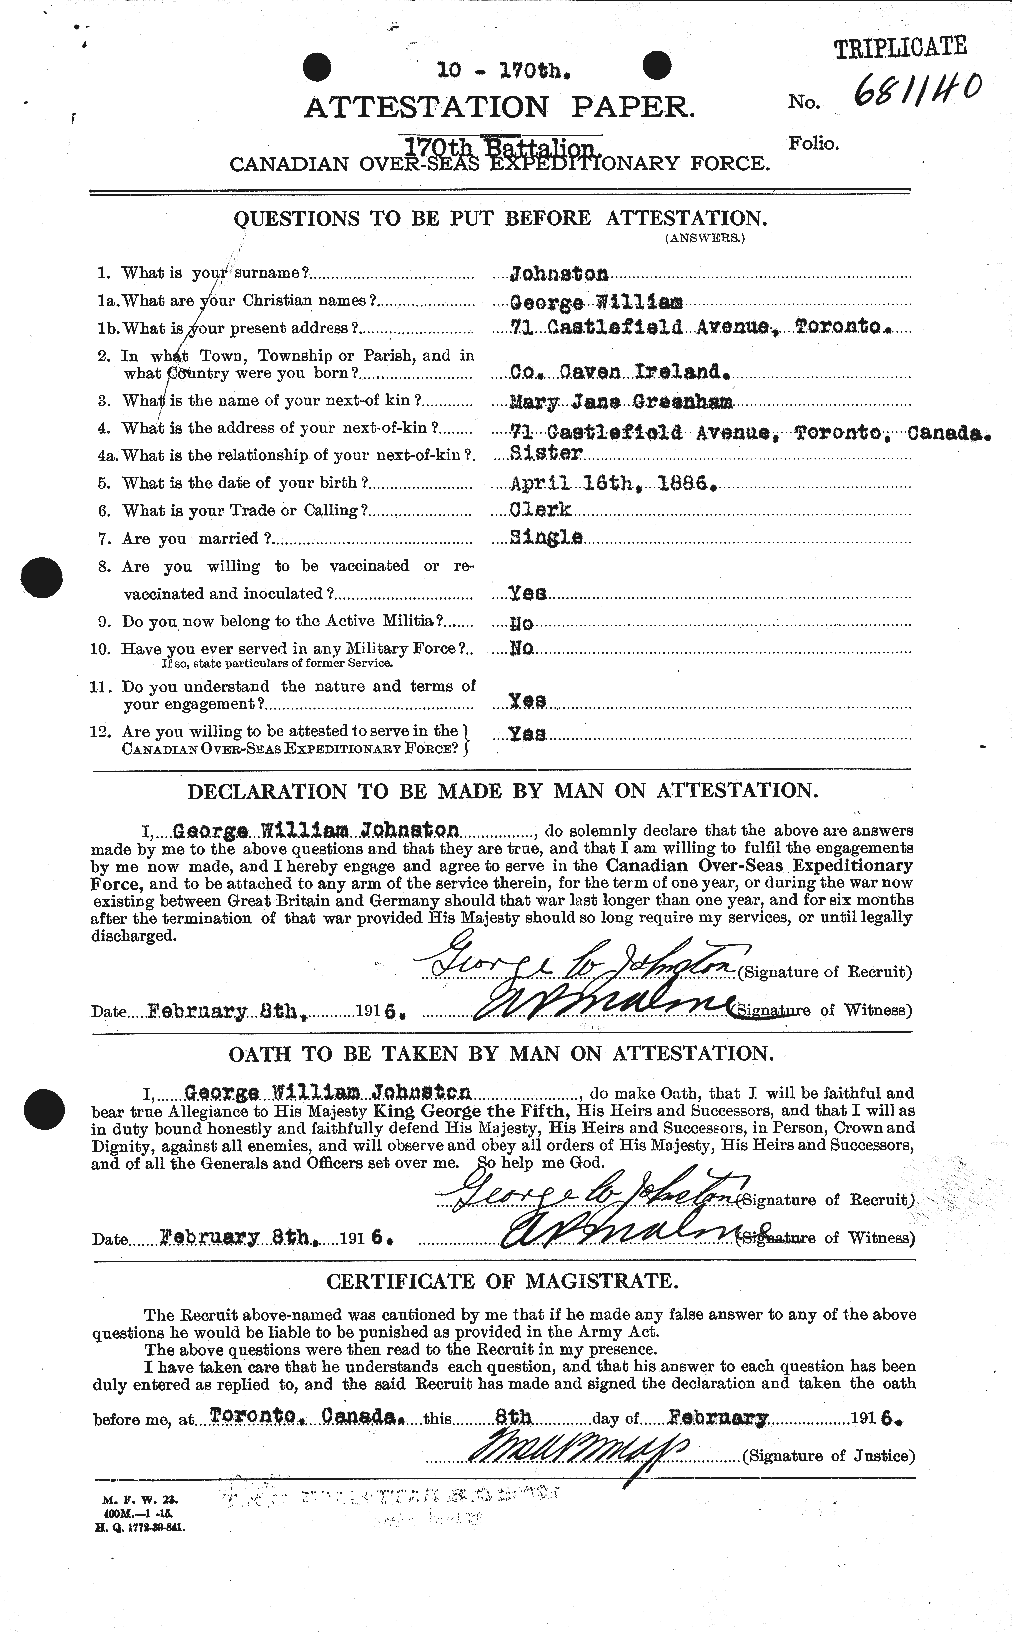 Personnel Records of the First World War - CEF 419451a